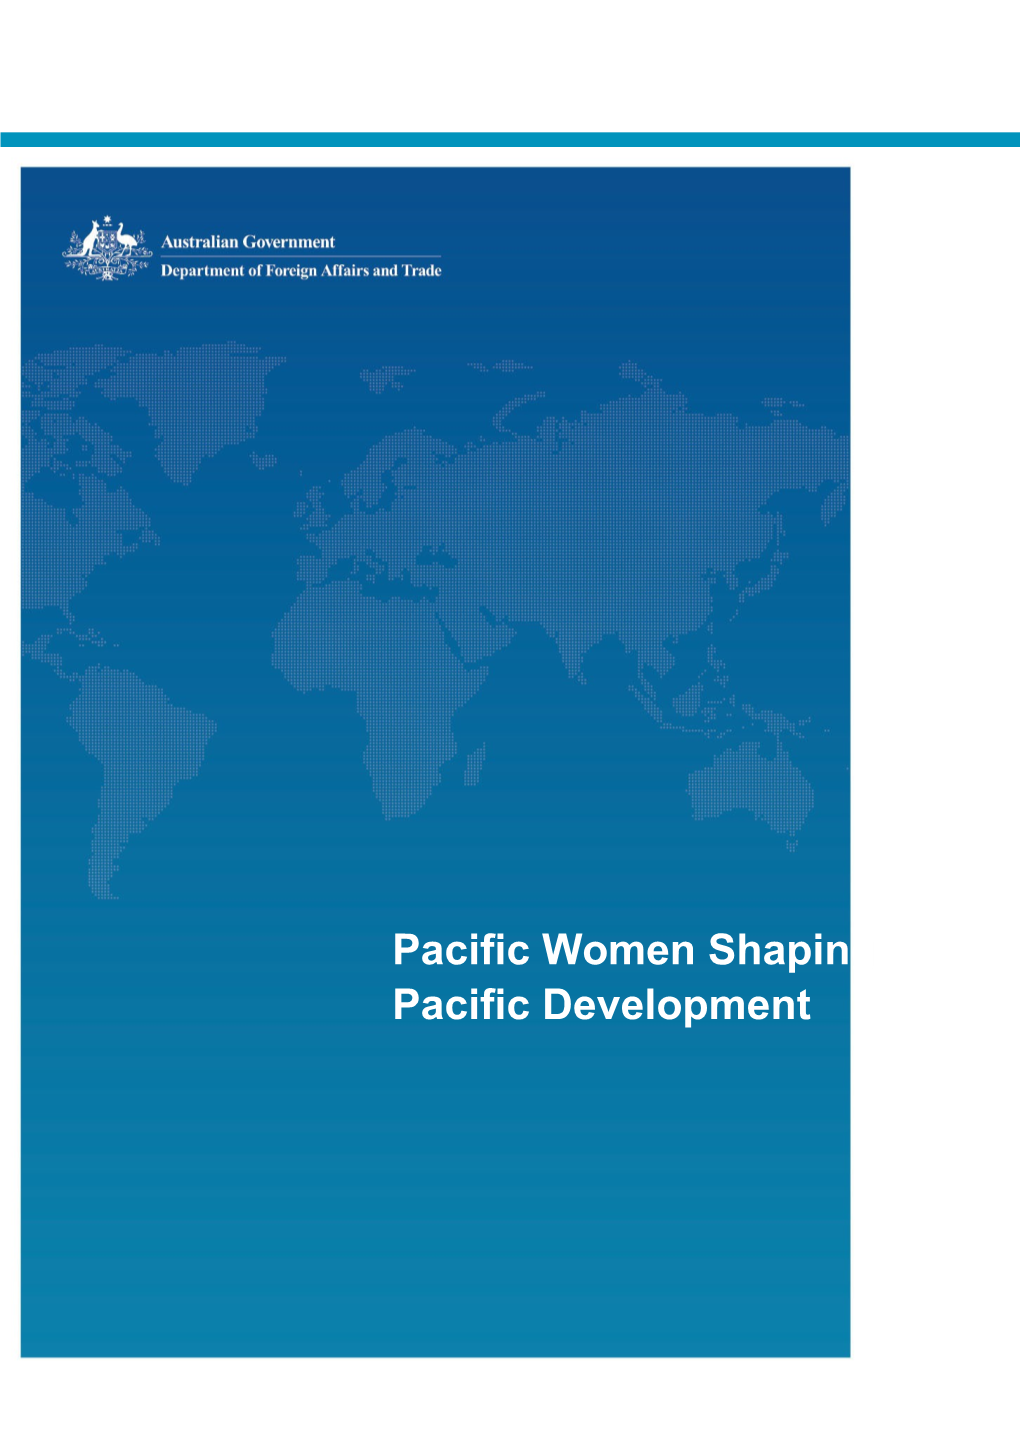 Pacific Women Shaping Pacific Development: Solomon Islands Country Plan Summary